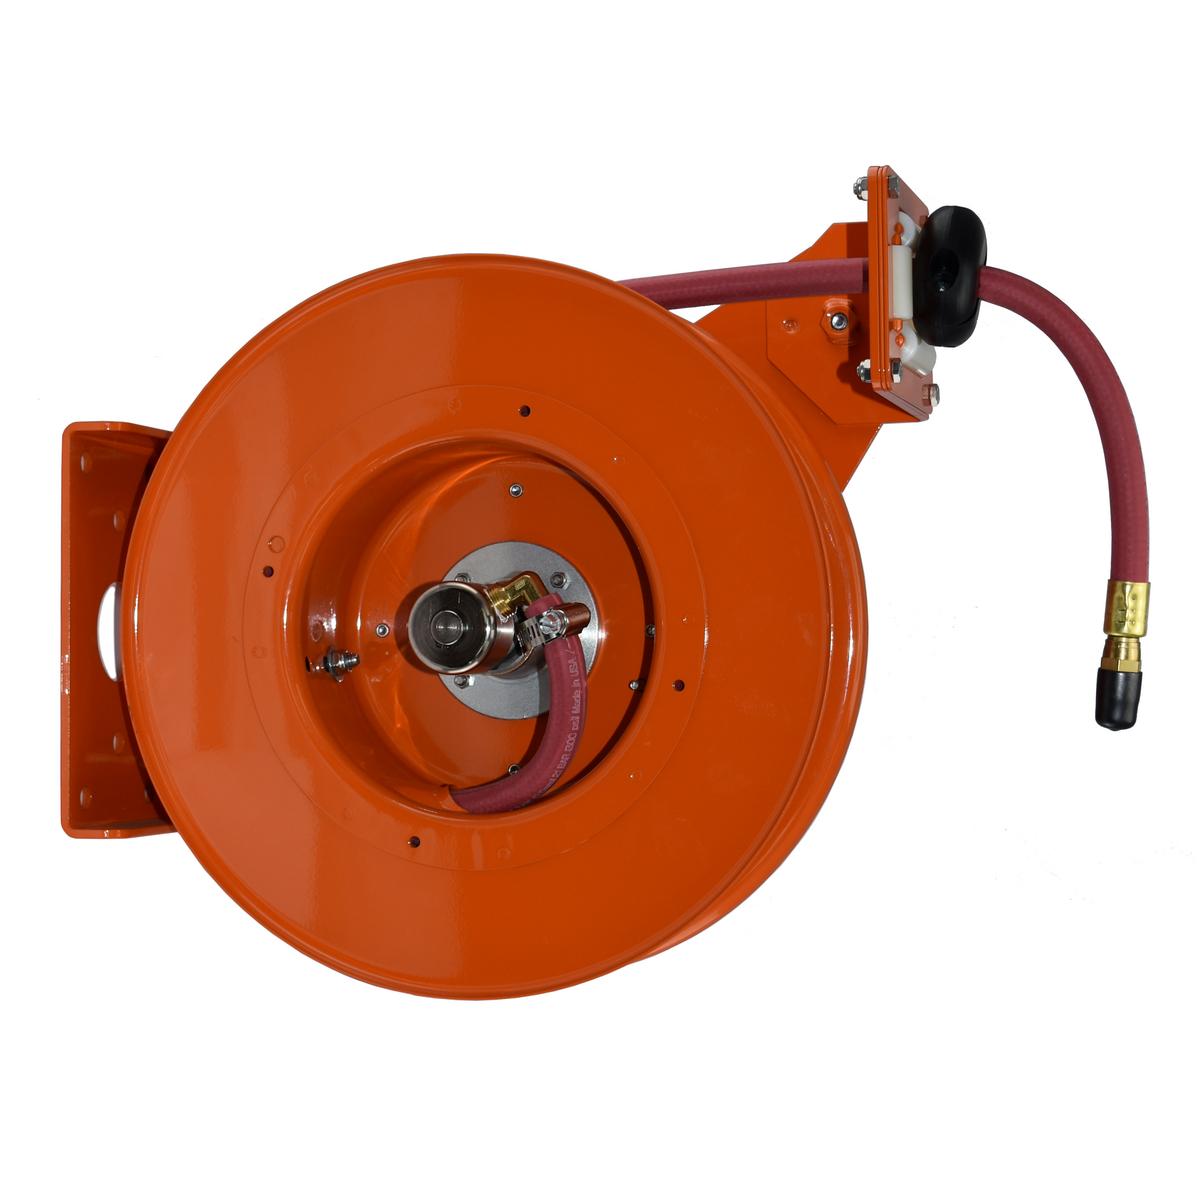 Hubbell HM143-4-P2 The Gleason Hose-Master hose reel is the most rugged single hose, general purpose hose reel of its size in the industry. We created it with the most demanding hose reeling applications in mind, hand pull or machine mounted. Oversized bearings and a heavy 